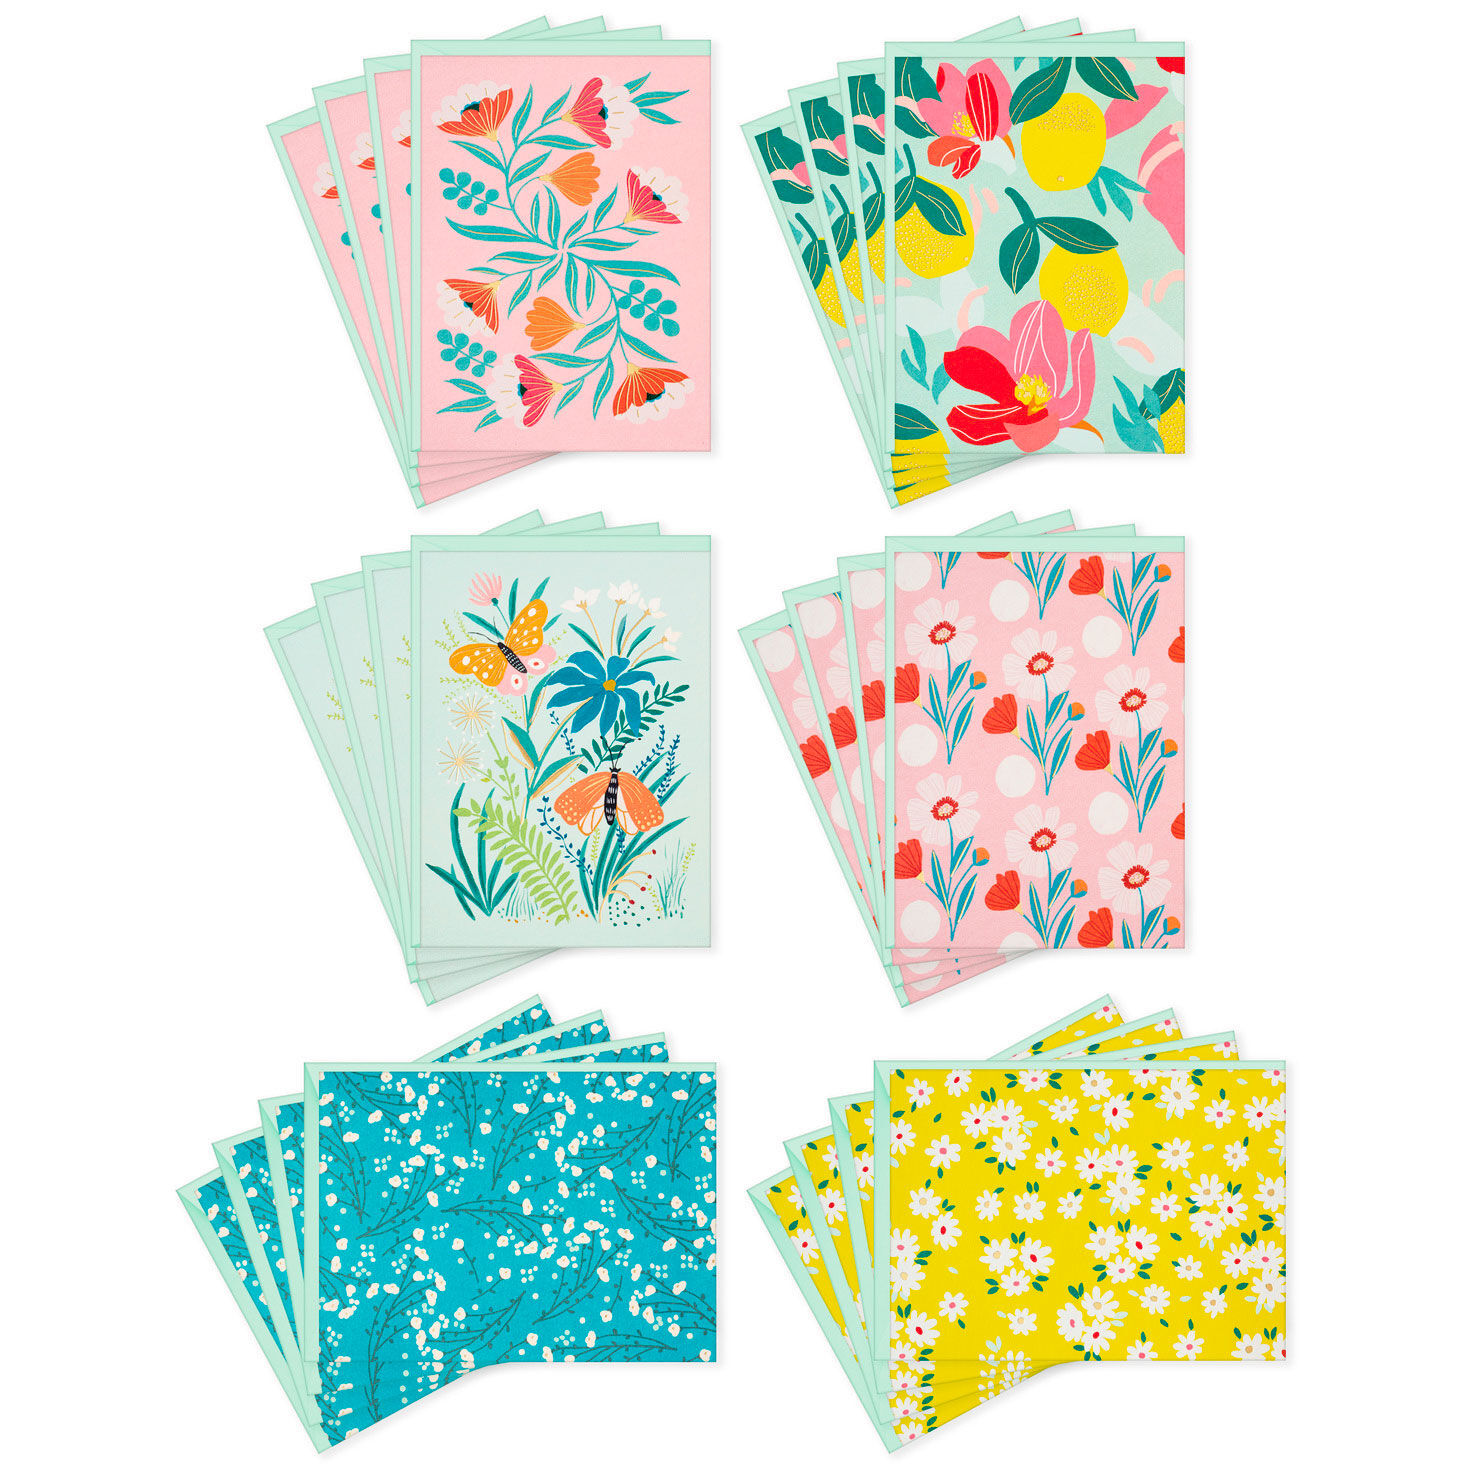 Floral Motif Boxed Blank Notes Assortment, Pack of 24 for only USD 14.99 | Hallmark